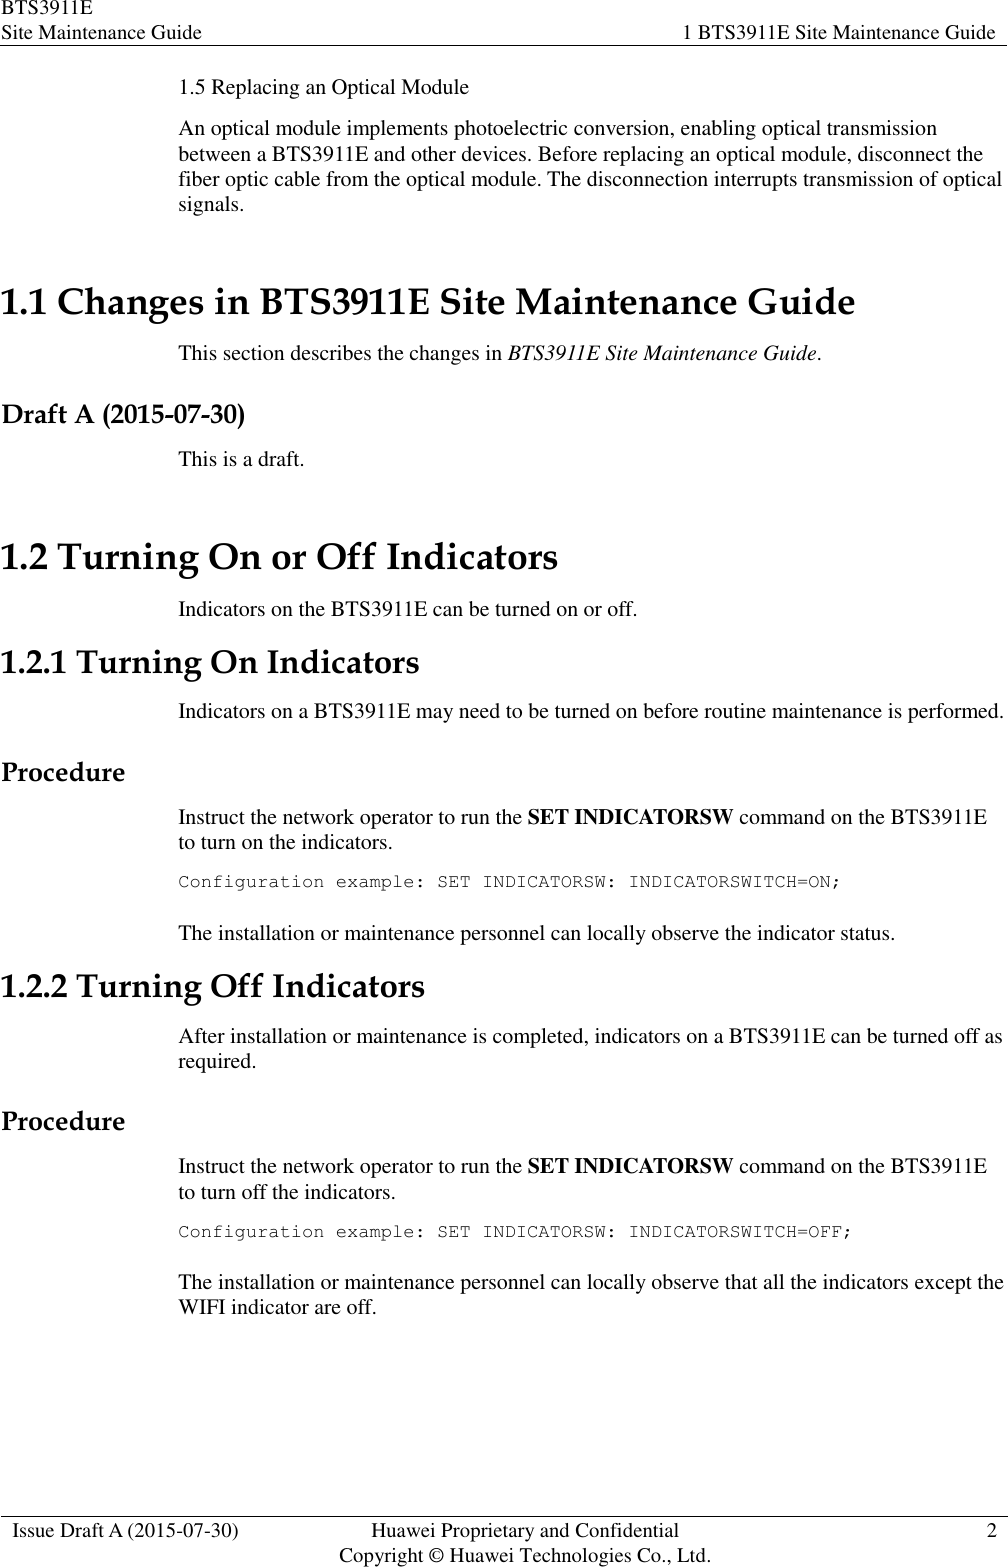 BTS3911E Site Maintenance Guide 1 BTS3911E Site Maintenance Guide  Issue Draft A (2015-07-30) Huawei Proprietary and Confidential           Copyright © Huawei Technologies Co., Ltd. 2  1.5 Replacing an Optical Module An optical module implements photoelectric conversion, enabling optical transmission between a BTS3911E and other devices. Before replacing an optical module, disconnect the fiber optic cable from the optical module. The disconnection interrupts transmission of optical signals. 1.1 Changes in BTS3911E Site Maintenance Guide This section describes the changes in BTS3911E Site Maintenance Guide. Draft A (2015-07-30) This is a draft. 1.2 Turning On or Off Indicators Indicators on the BTS3911E can be turned on or off. 1.2.1 Turning On Indicators Indicators on a BTS3911E may need to be turned on before routine maintenance is performed. Procedure Instruct the network operator to run the SET INDICATORSW command on the BTS3911E to turn on the indicators. Configuration example: SET INDICATORSW: INDICATORSWITCH=ON; The installation or maintenance personnel can locally observe the indicator status. 1.2.2 Turning Off Indicators After installation or maintenance is completed, indicators on a BTS3911E can be turned off as required. Procedure Instruct the network operator to run the SET INDICATORSW command on the BTS3911E to turn off the indicators. Configuration example: SET INDICATORSW: INDICATORSWITCH=OFF; The installation or maintenance personnel can locally observe that all the indicators except the WIFI indicator are off. 